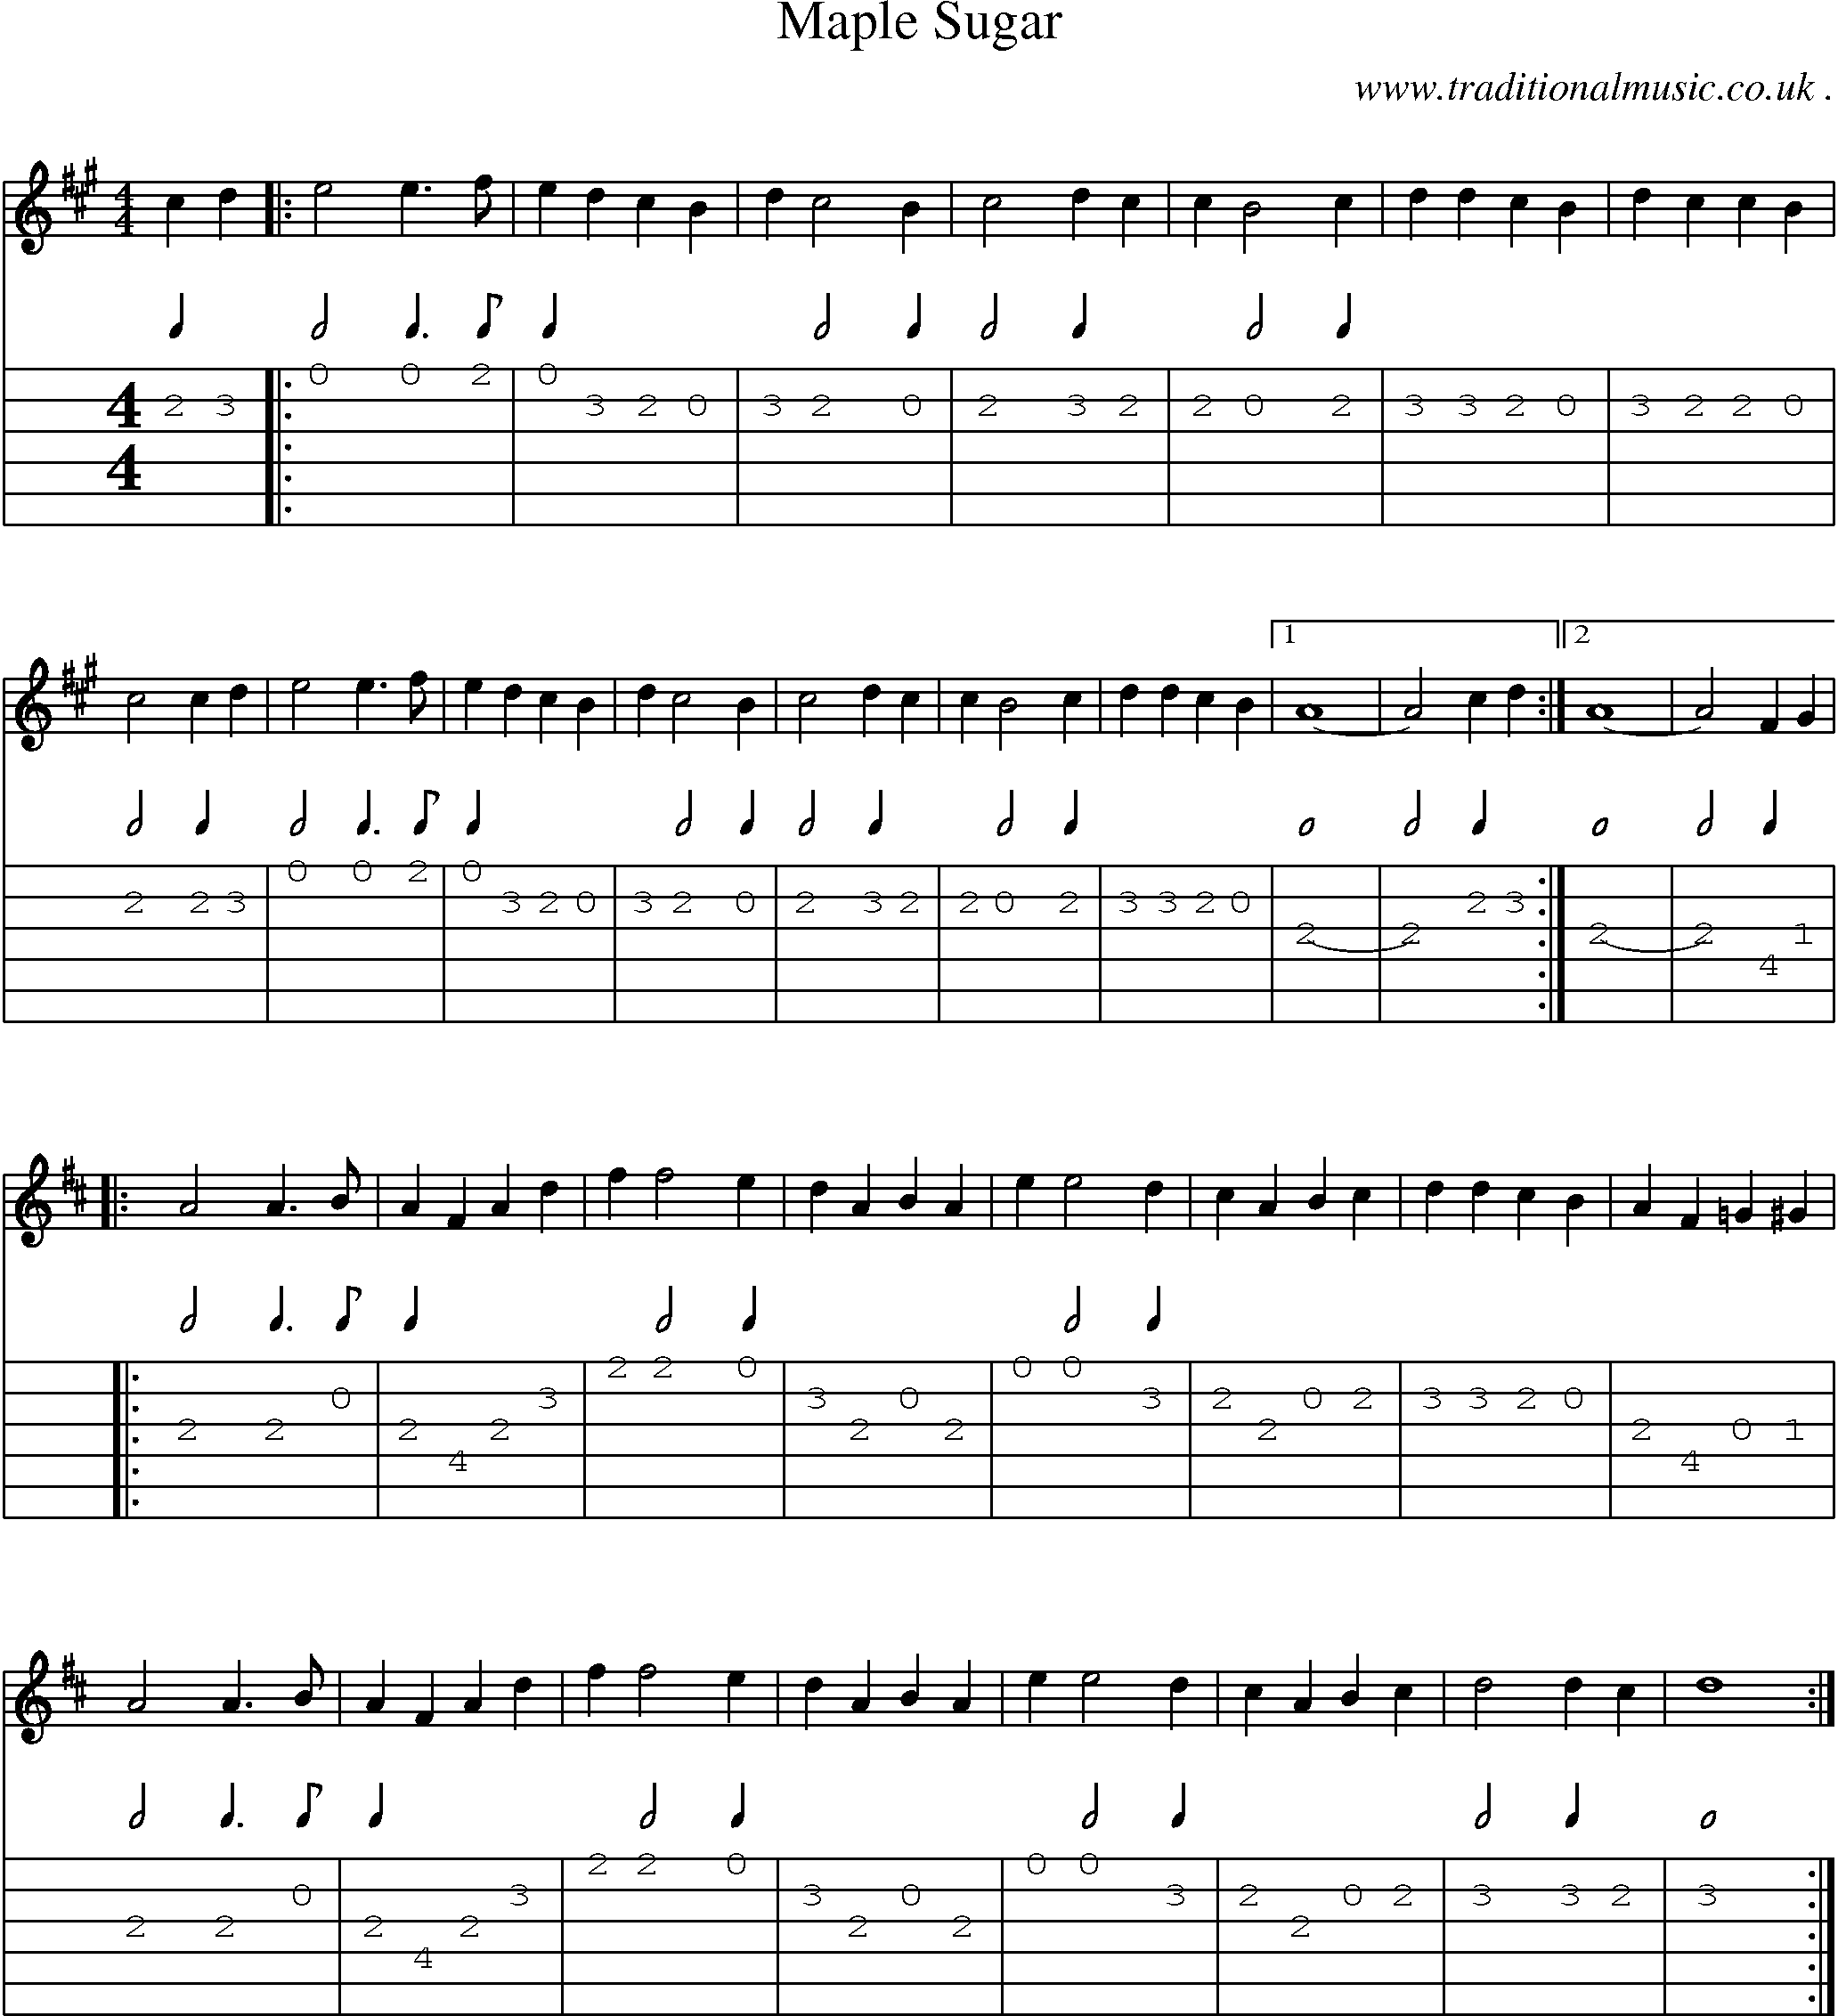 Sheet-Music and Guitar Tabs for Maple Sugar